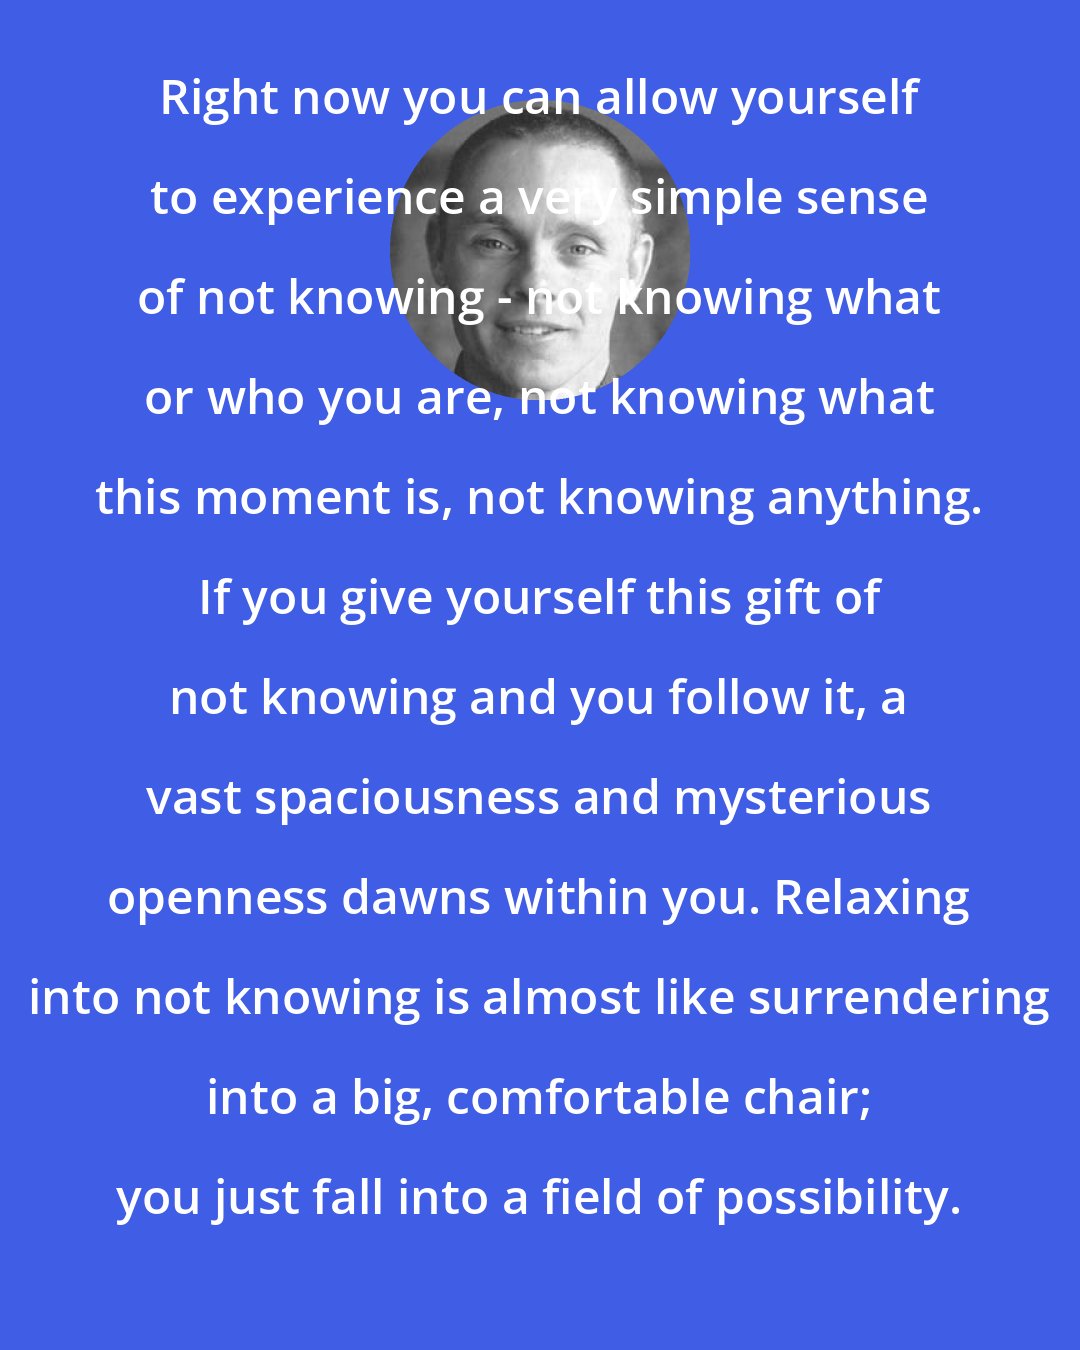 Adyashanti: Right now you can allow yourself to experience a very simple sense of not knowing - not knowing what or who you are, not knowing what this moment is, not knowing anything. If you give yourself this gift of not knowing and you follow it, a vast spaciousness and mysterious openness dawns within you. Relaxing into not knowing is almost like surrendering into a big, comfortable chair; you just fall into a field of possibility.